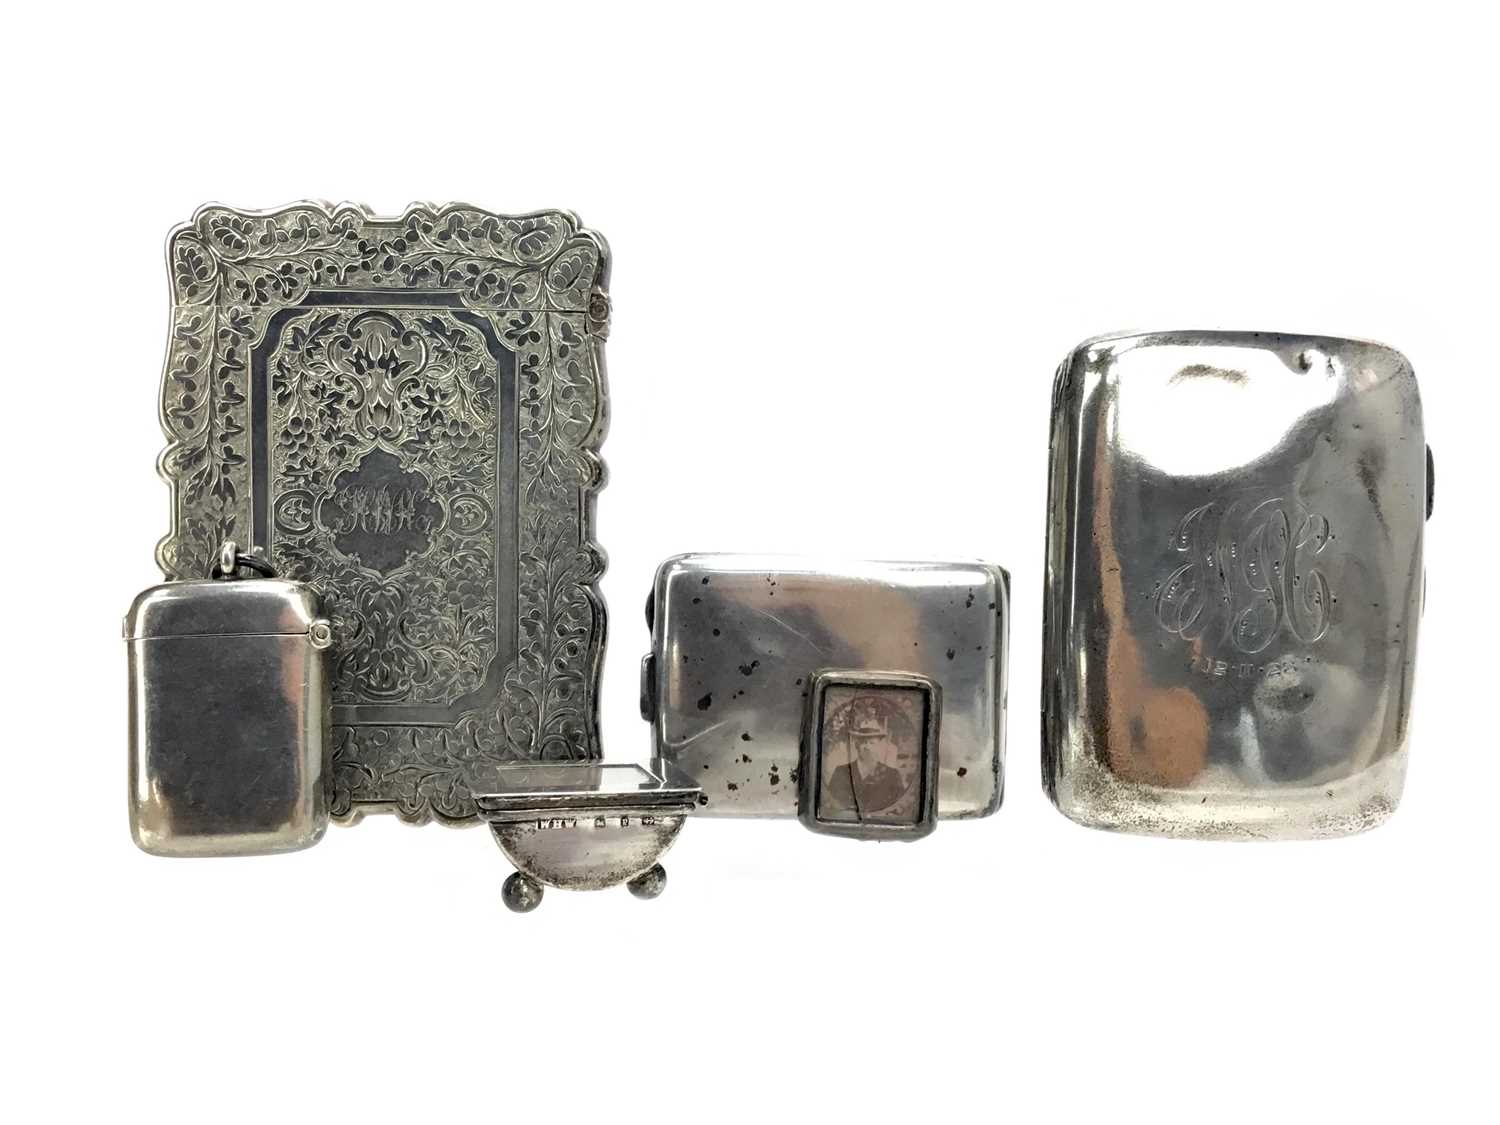 Lot 457 - A VICTORIAN SILVER CARD HOLDER ALONG WITH A CIGARETTE CASE AND OTHER ITEMS